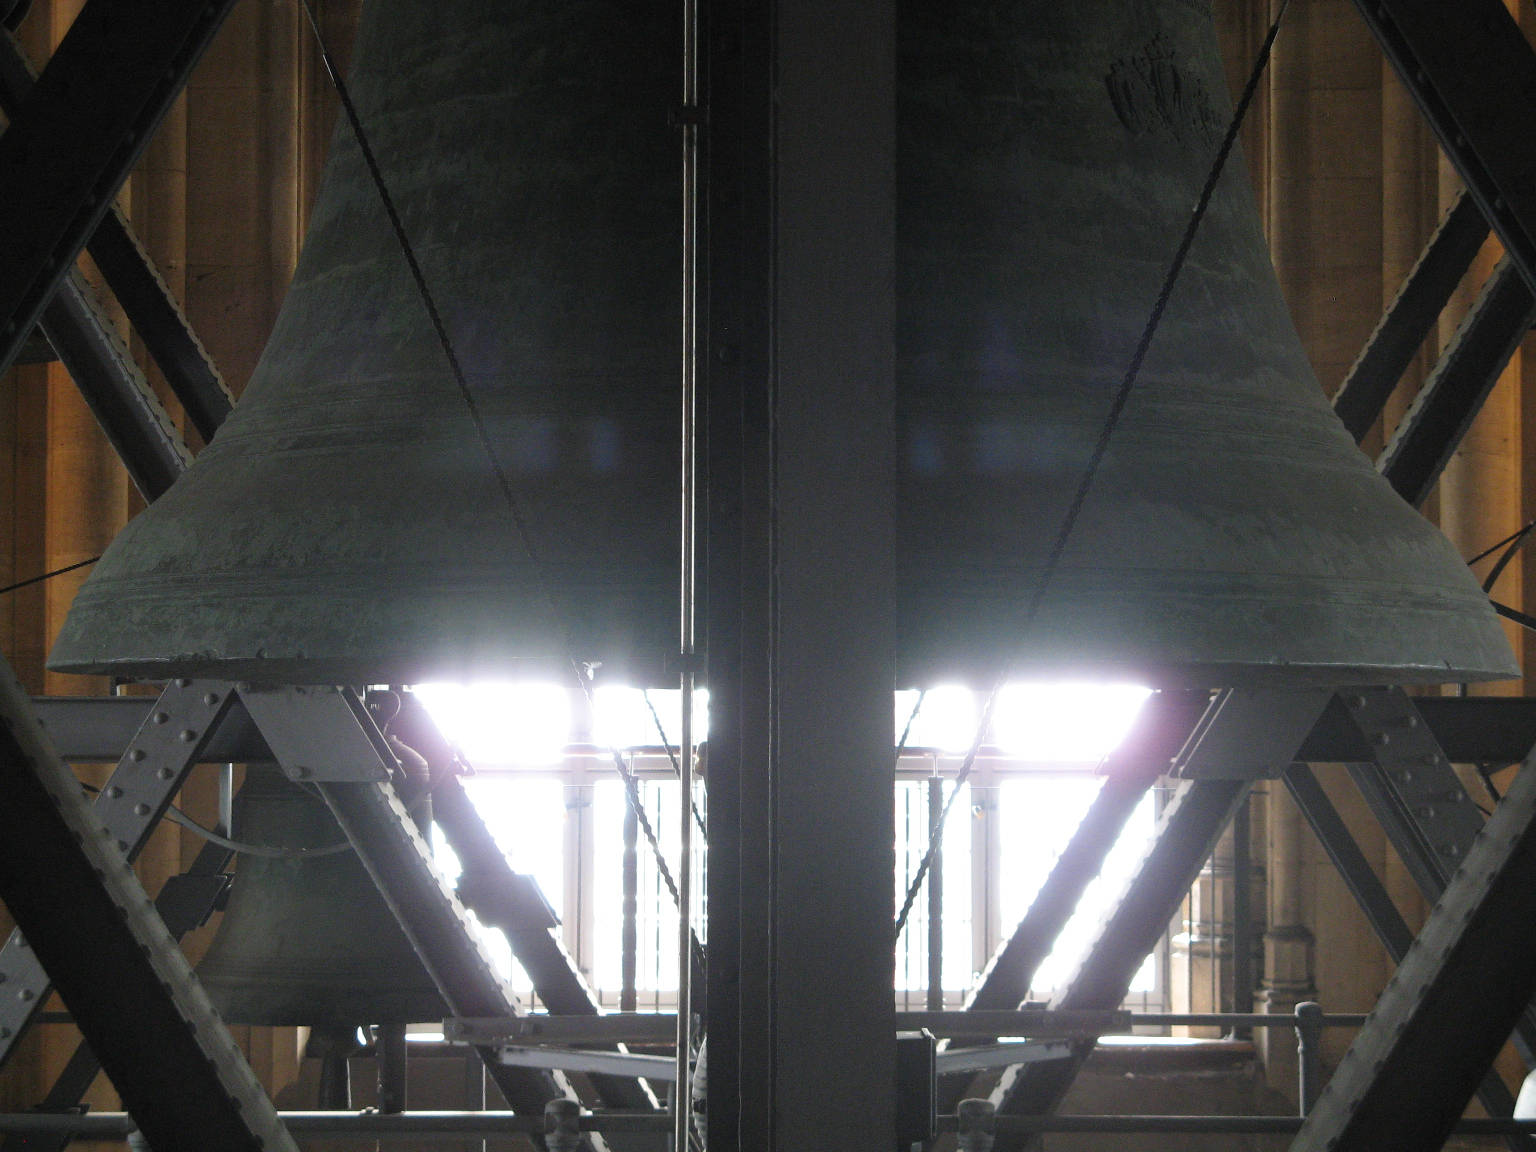 The same bell